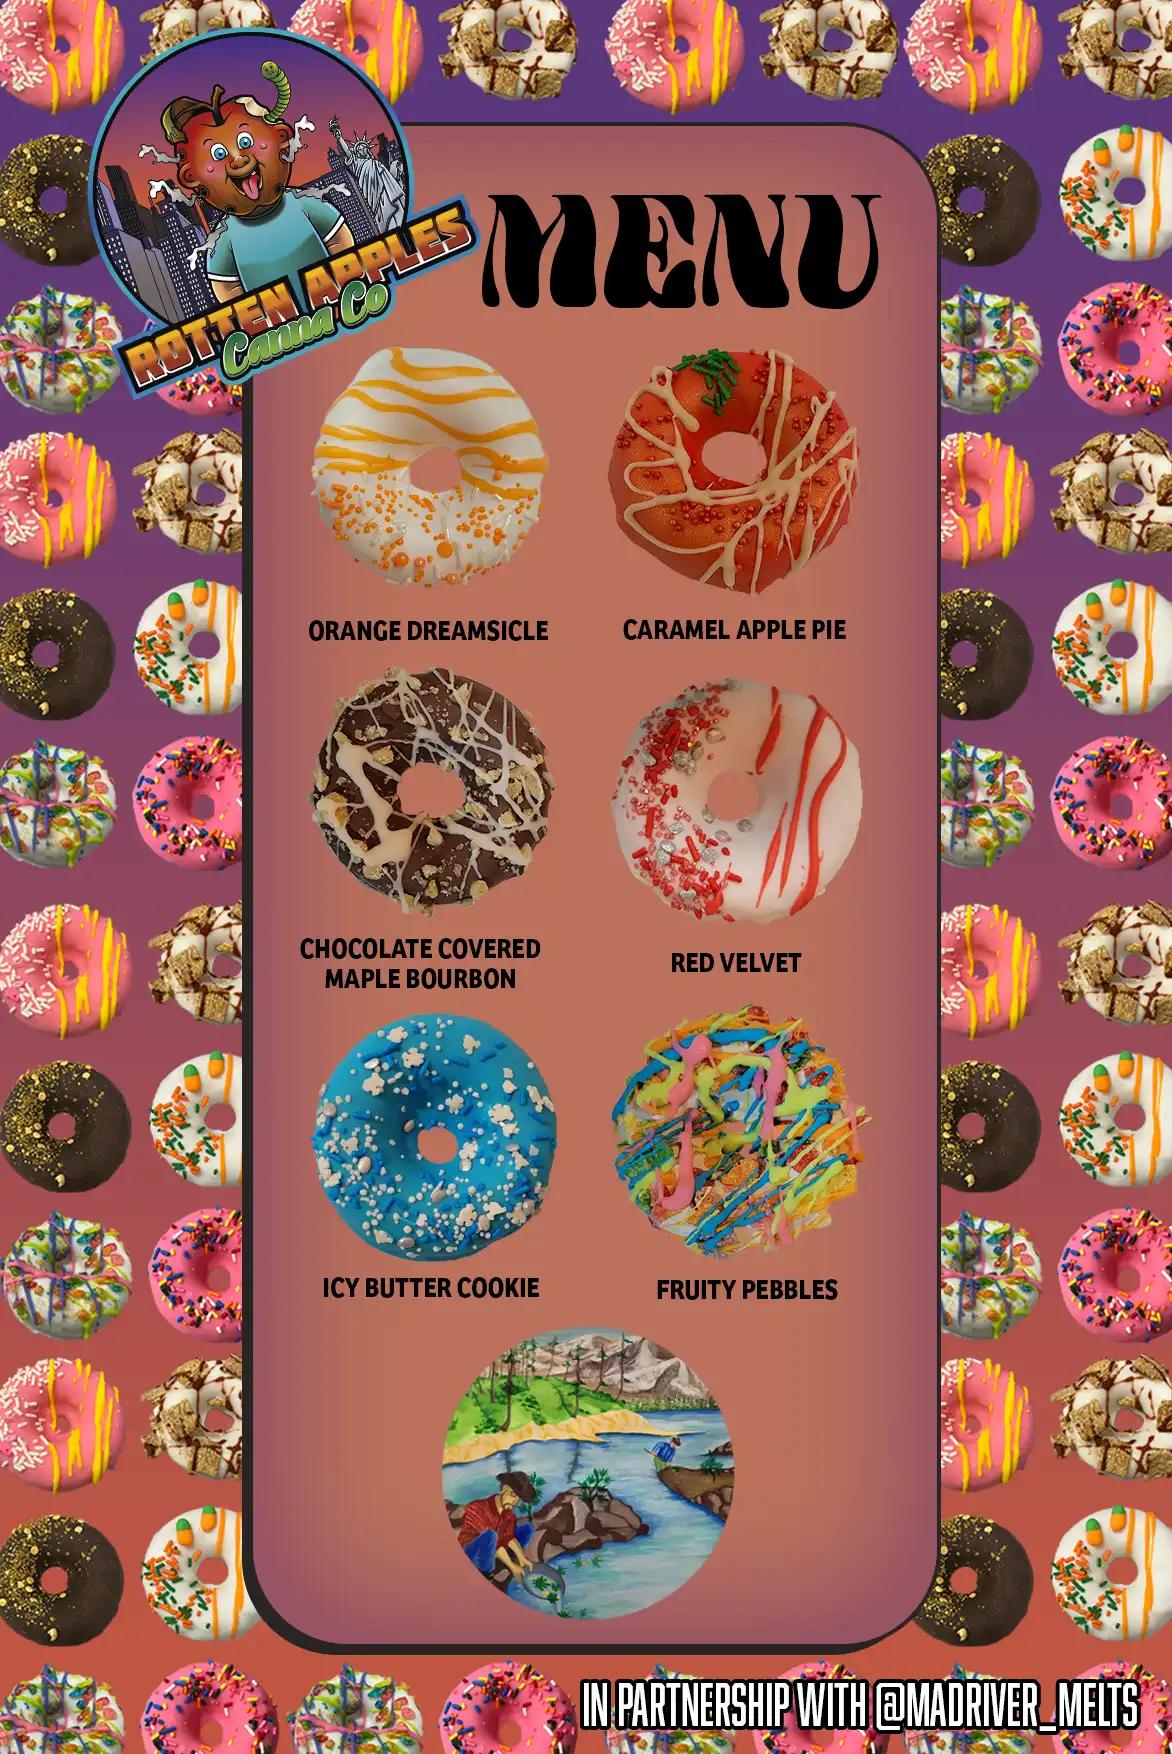 Rotten Apples Canna Co.'s donut menu in collaboration with Madriver_Melts including six donuts, the Orange Dreamsicle Donut, Caramel Apple Pie Donut, Chocolate Covered Maple Bourbon Donut, Red Velvet Donut, Icy Butter Cookie Donut, and the Fruity Pebbles Donut.